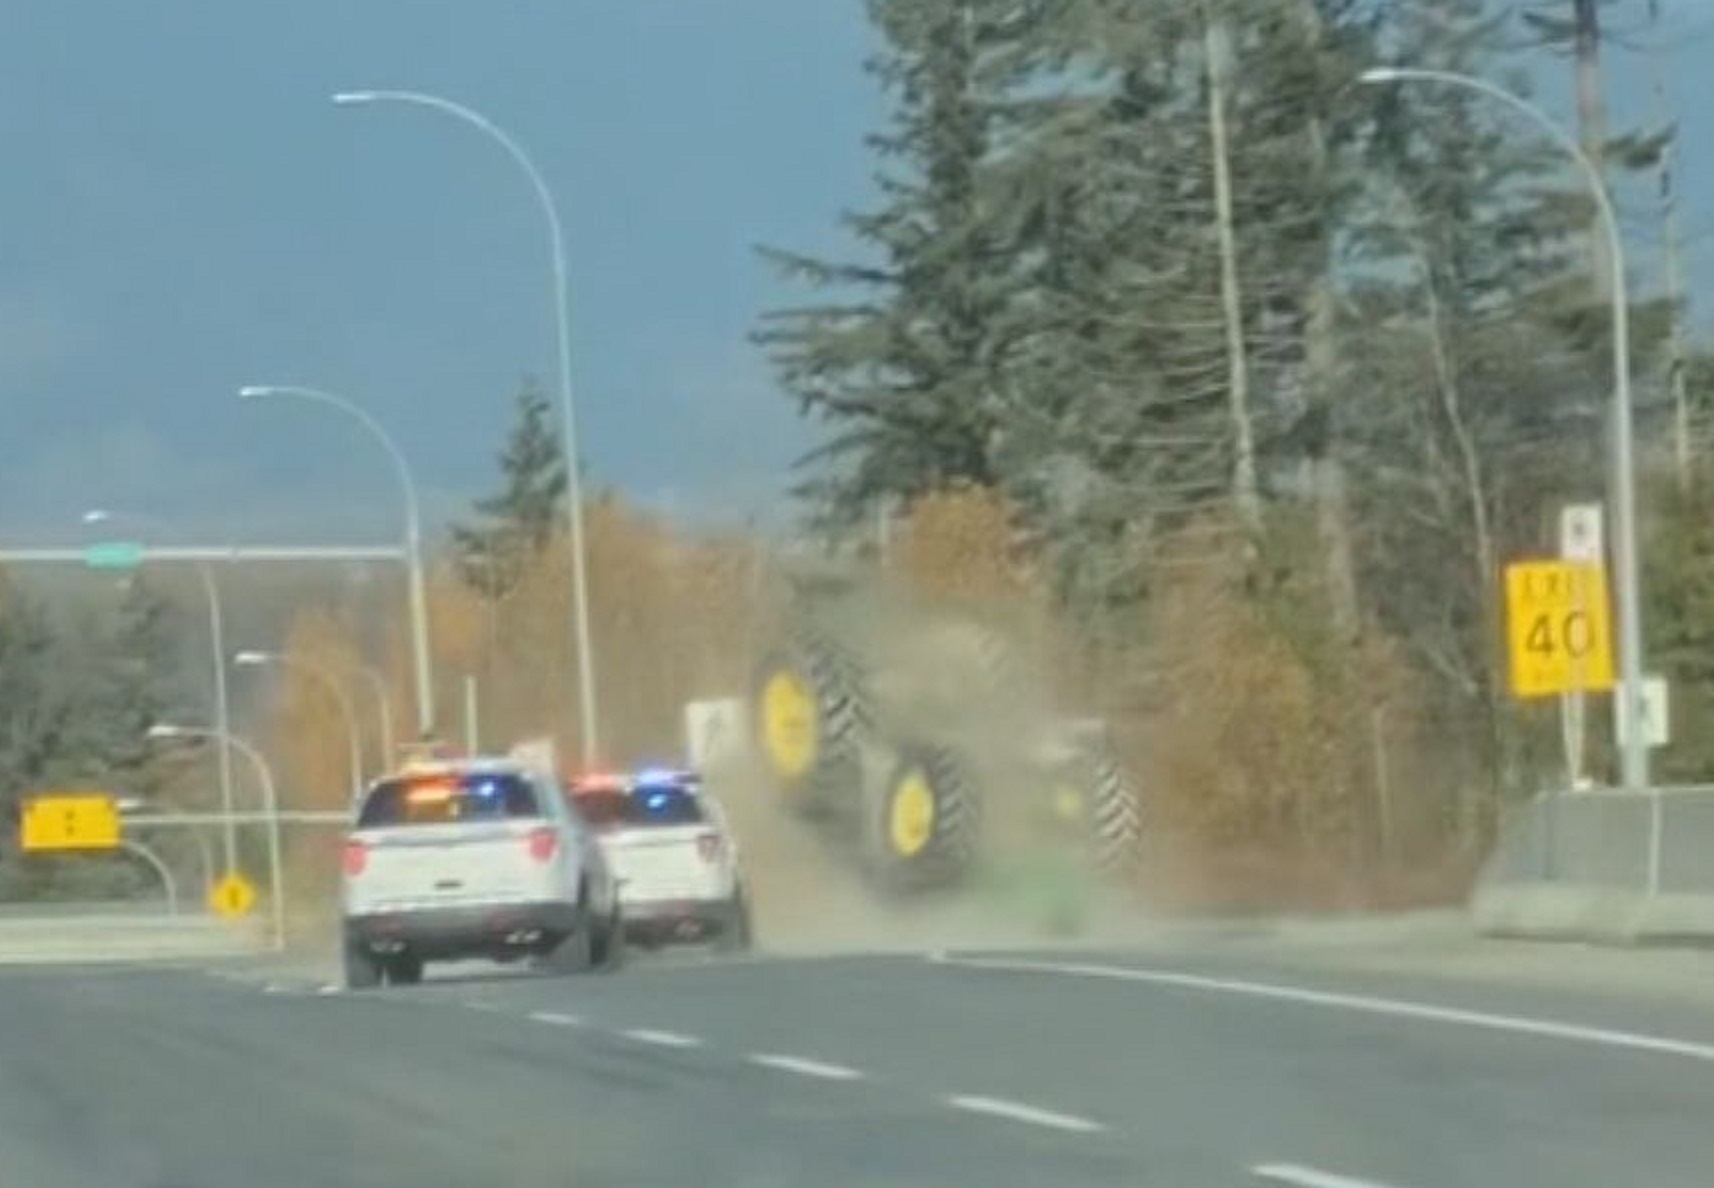 Wife of tractor driver speaks day after police chase in Surrey